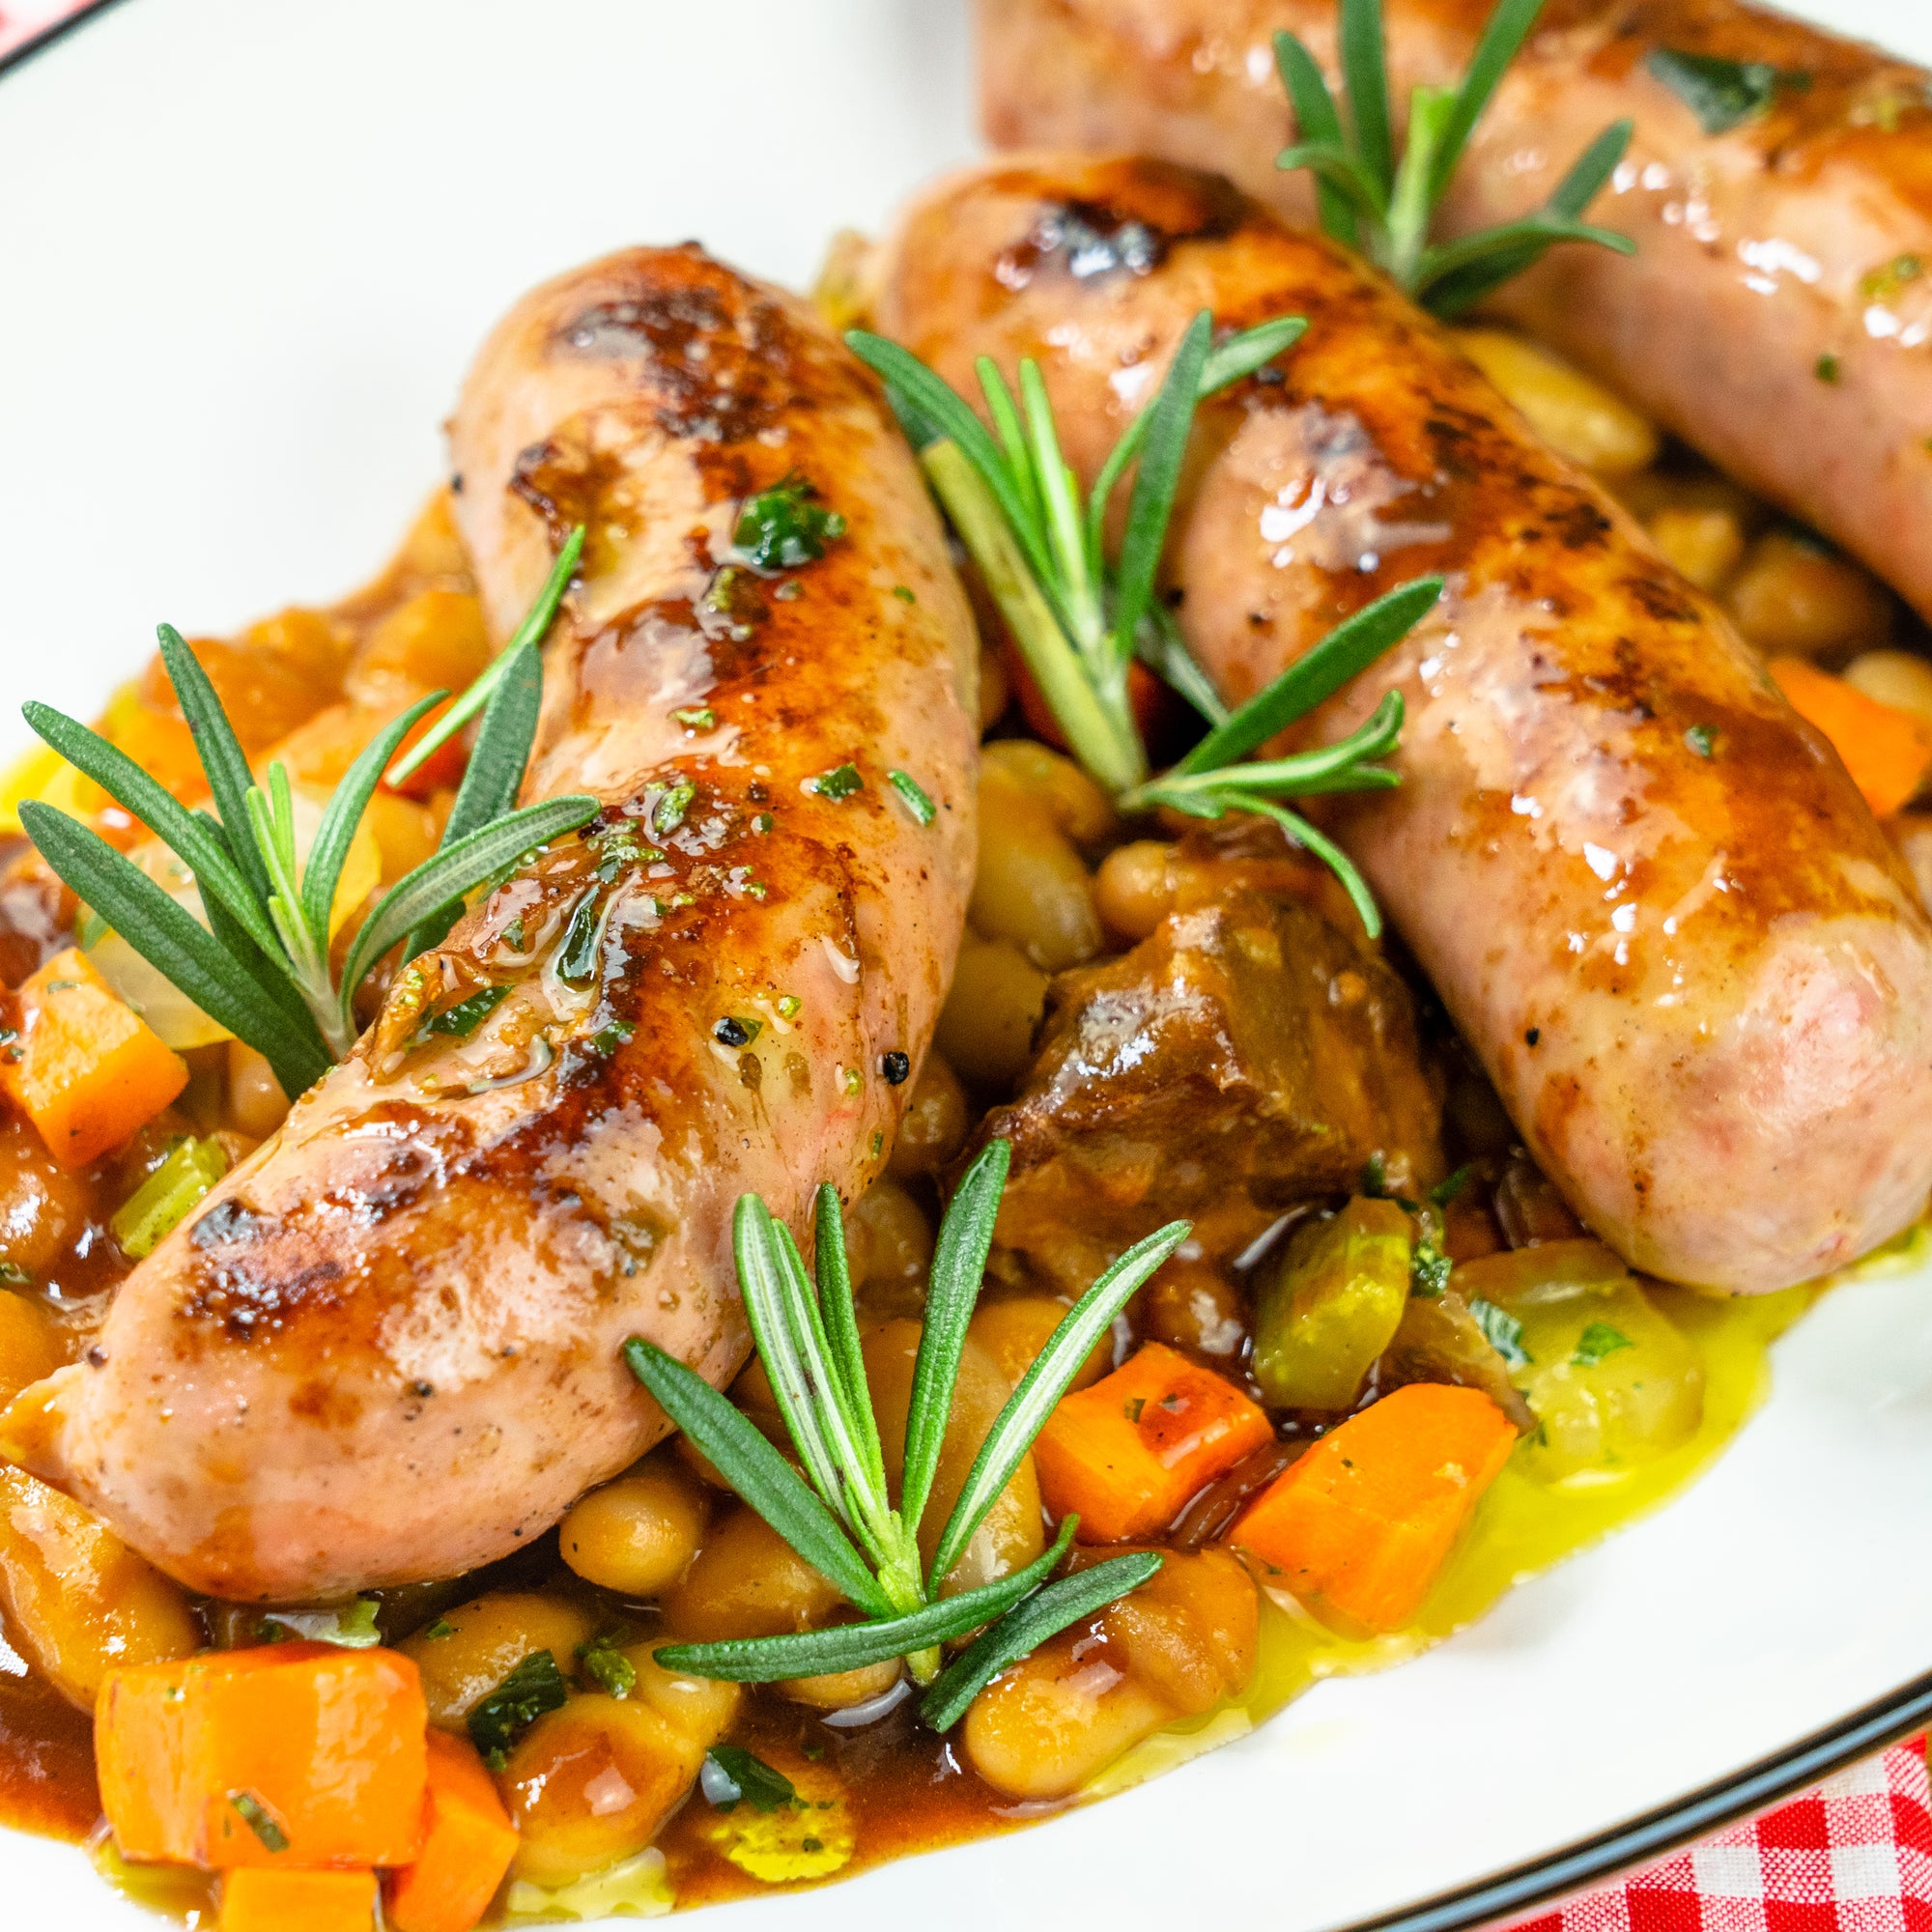 FAGIOLI ALL'UCCELLETTO CON SALSICCE - Braised Beans with Pork Sausages  - Suitable for 2 People